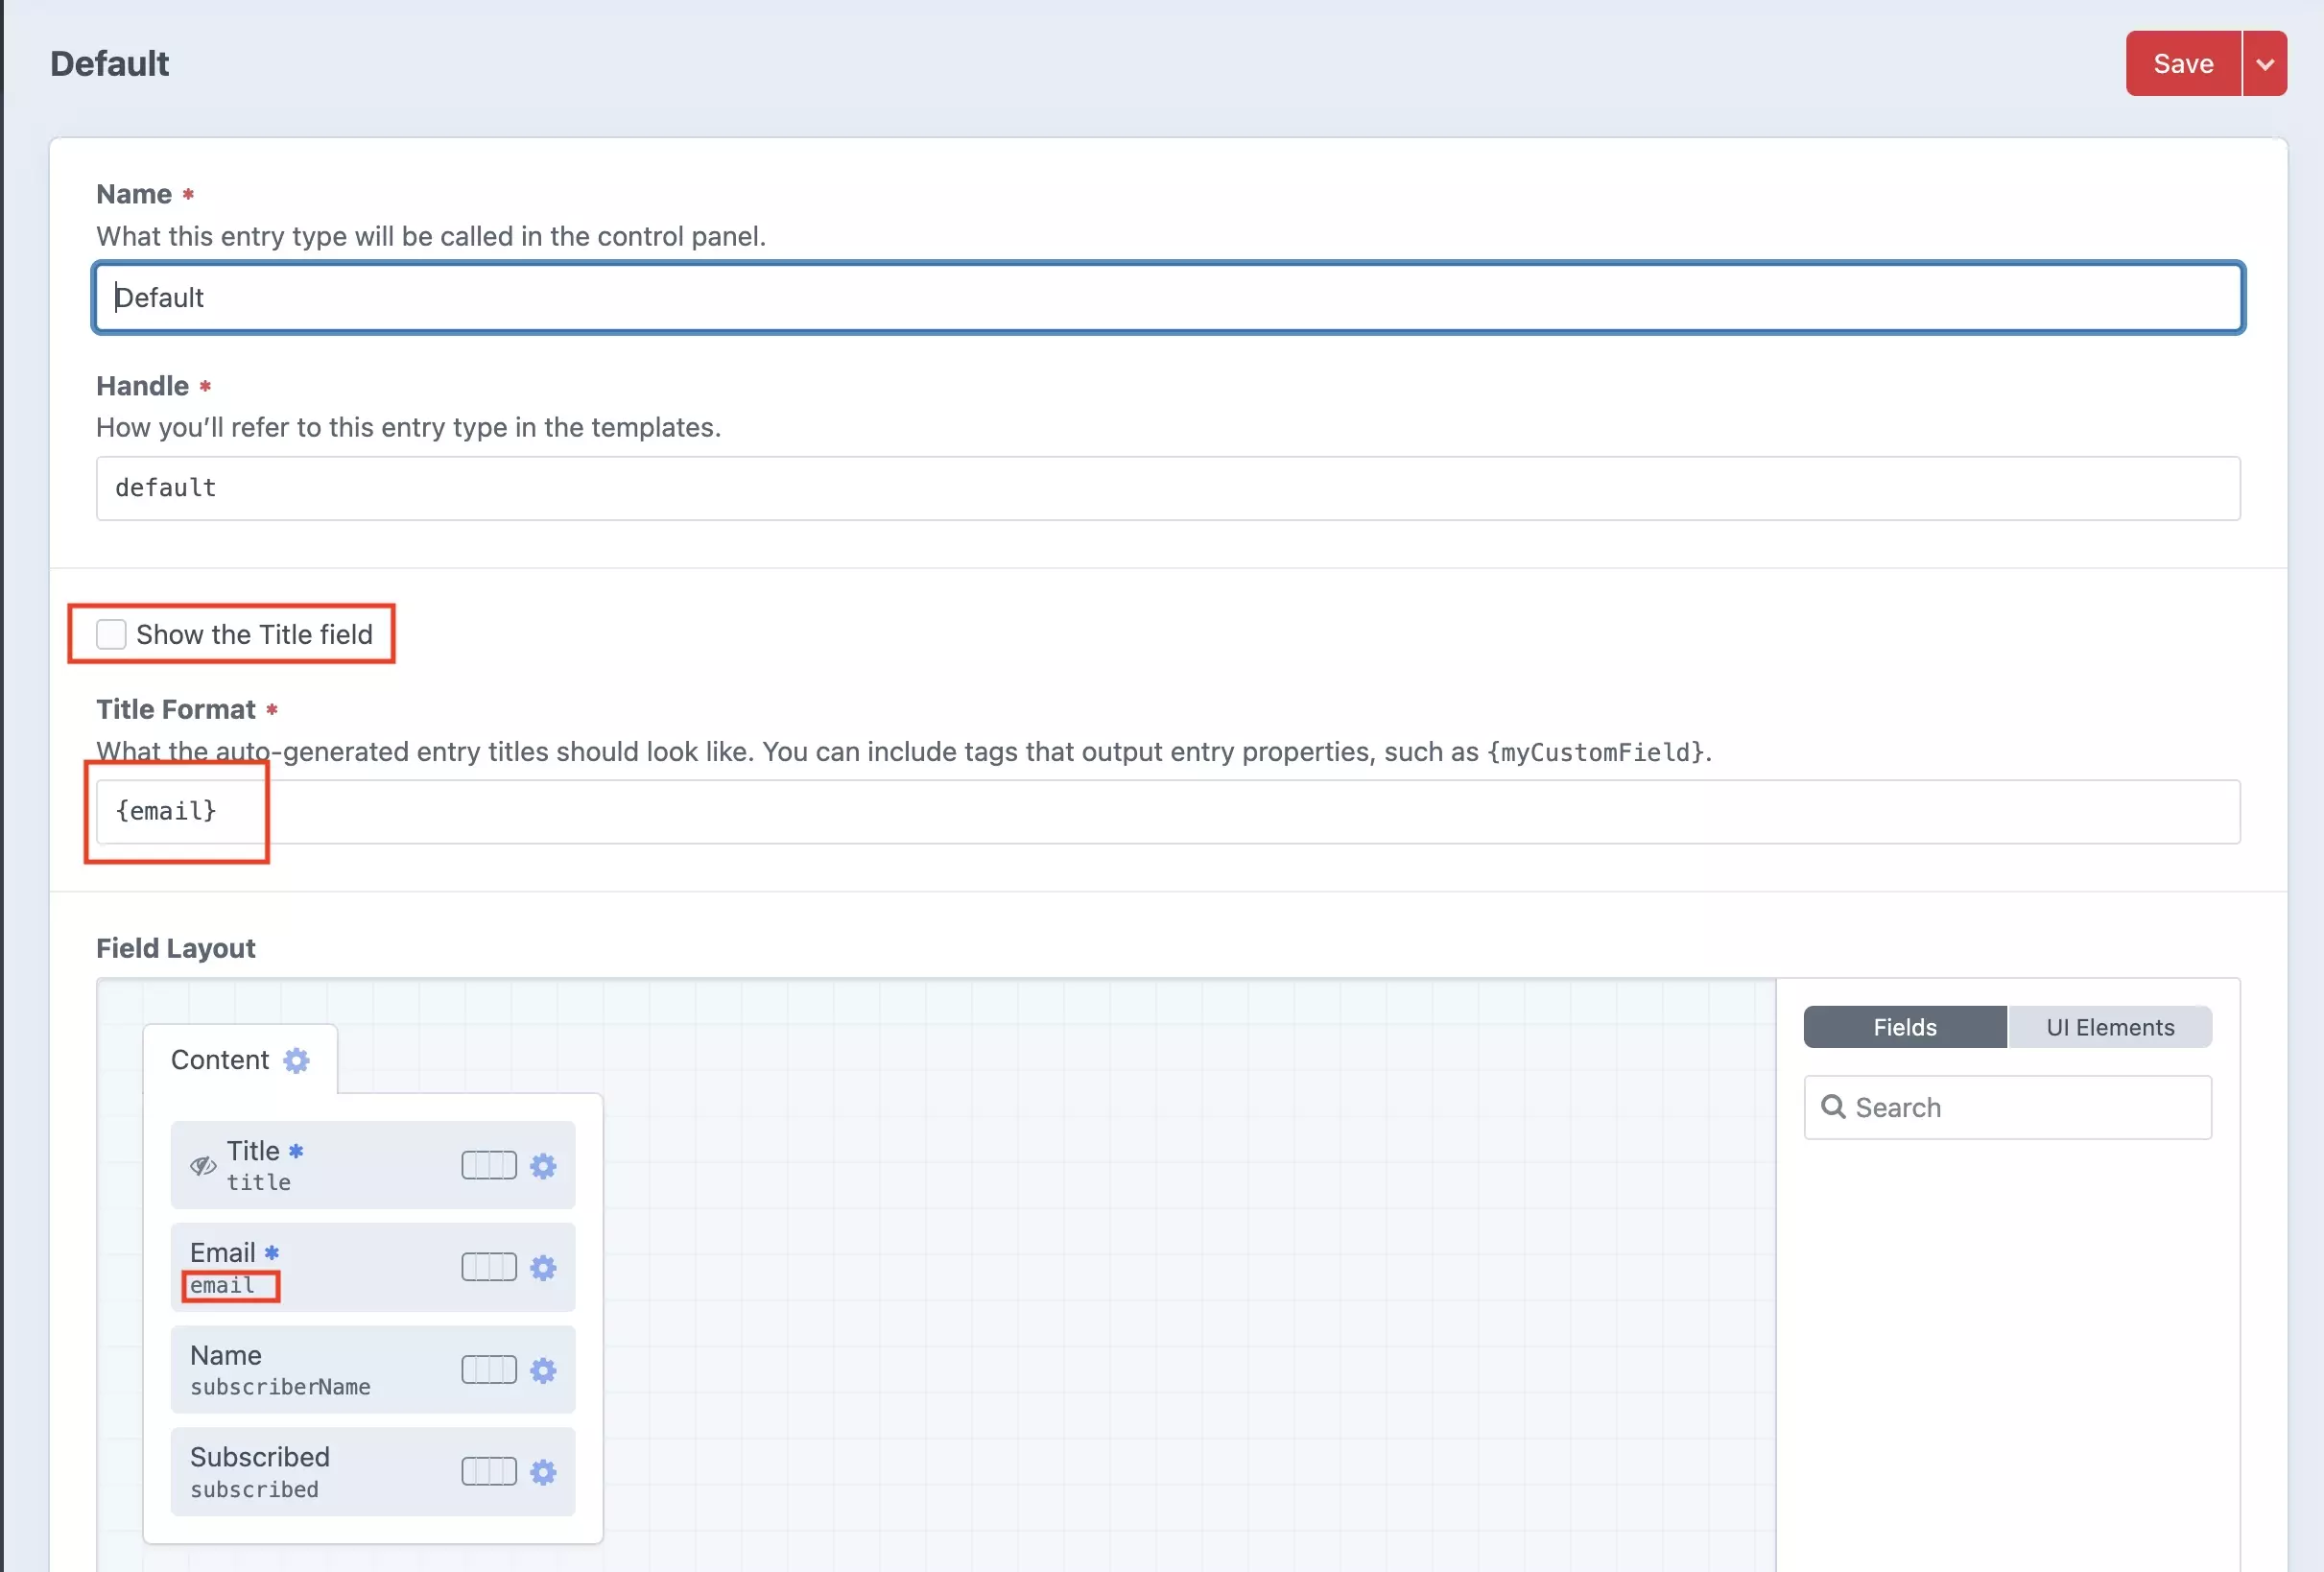 A screenshot of the Craft CMS Entry Type screen. It has a highlight on the unchecked "Show the title field", the "Title Format" field that has been replaced with {email}, which is the email field handle; finally the "email" field handle has also been highlighted to show the link between the {email} and email handle.